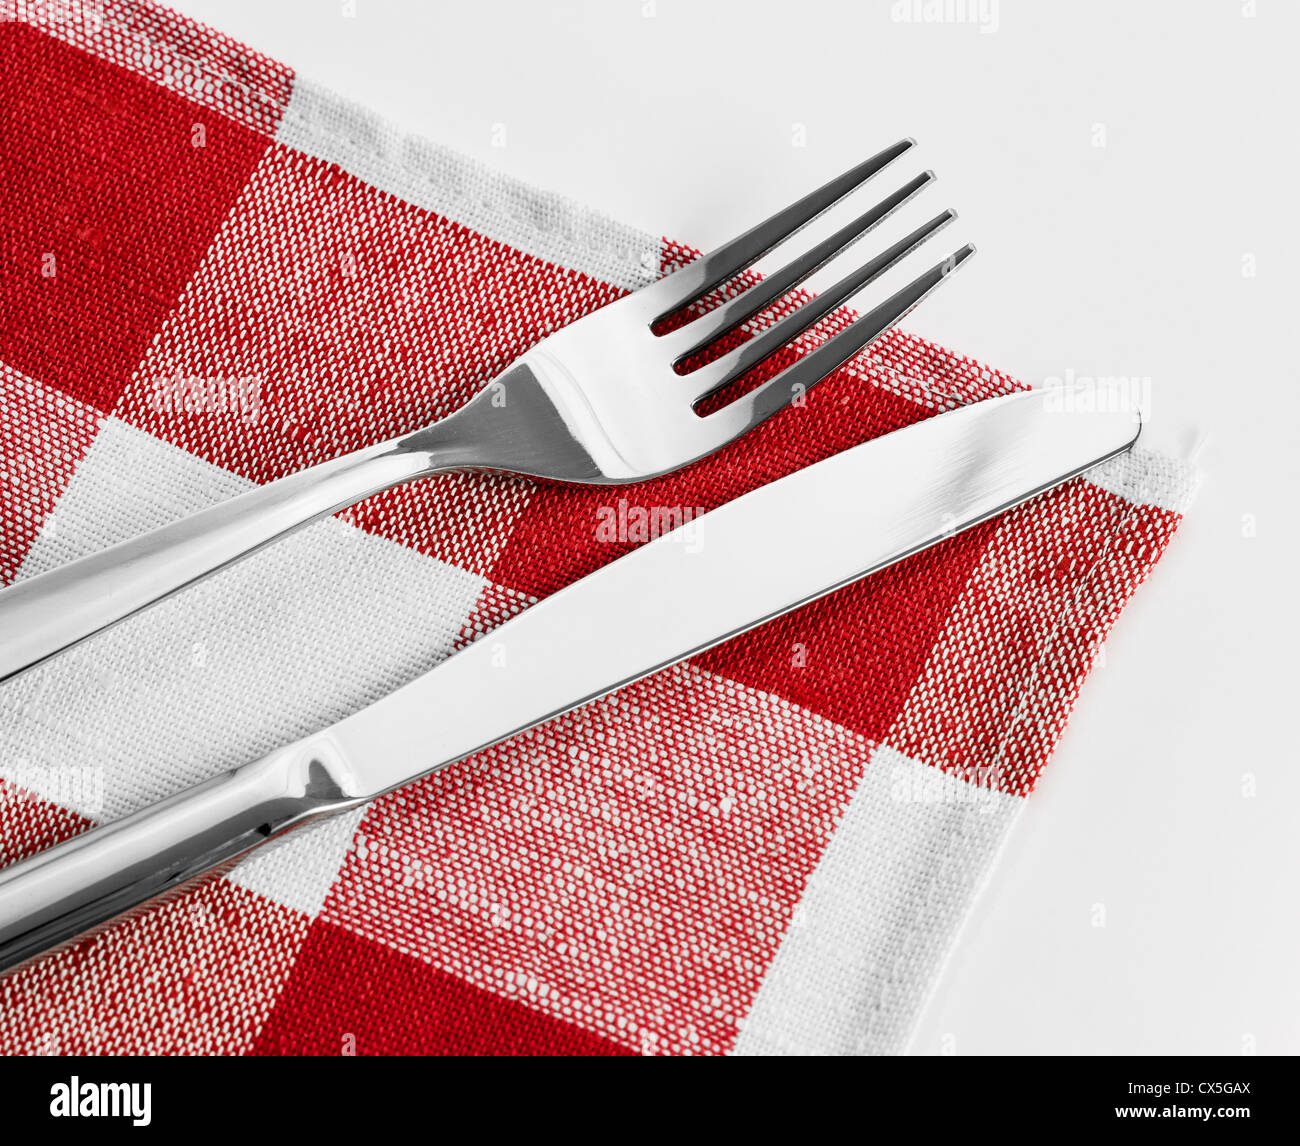 Knife and fork on red checked tablecloth Stock Photo